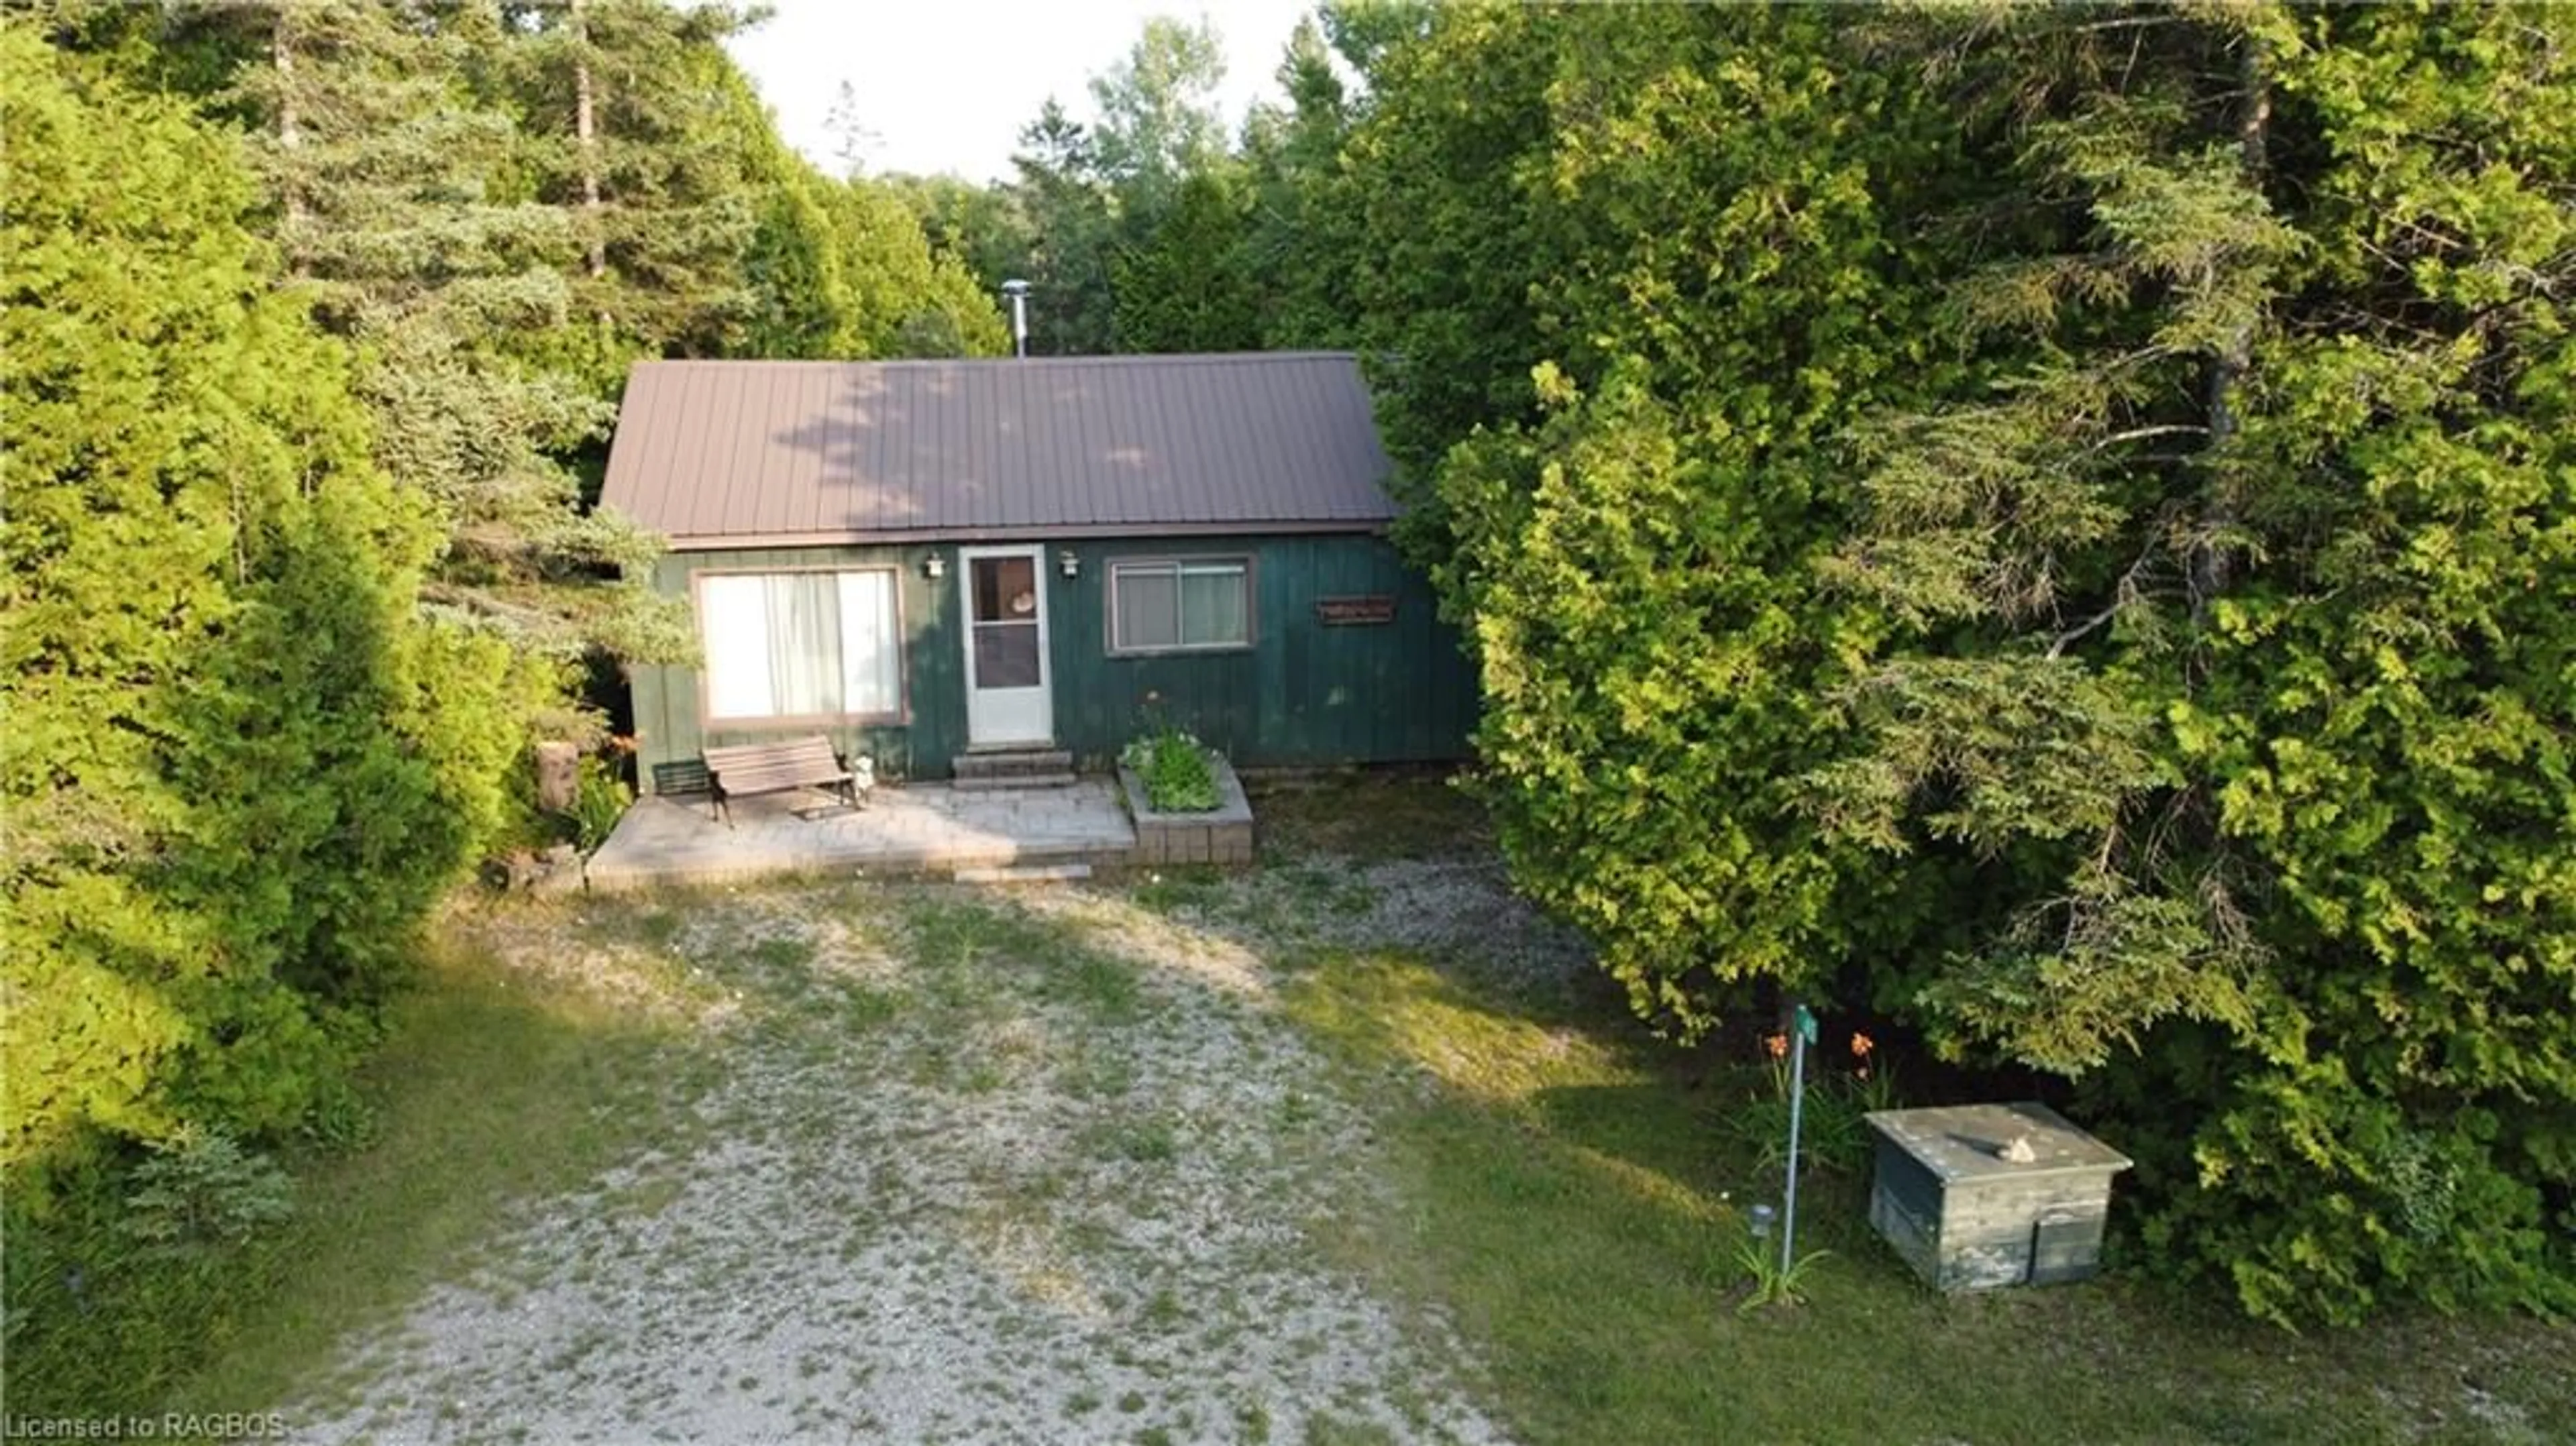 Cottage for 45 Baywatch Dr, Northern Bruce Peninsula Ontario N0H 2T0